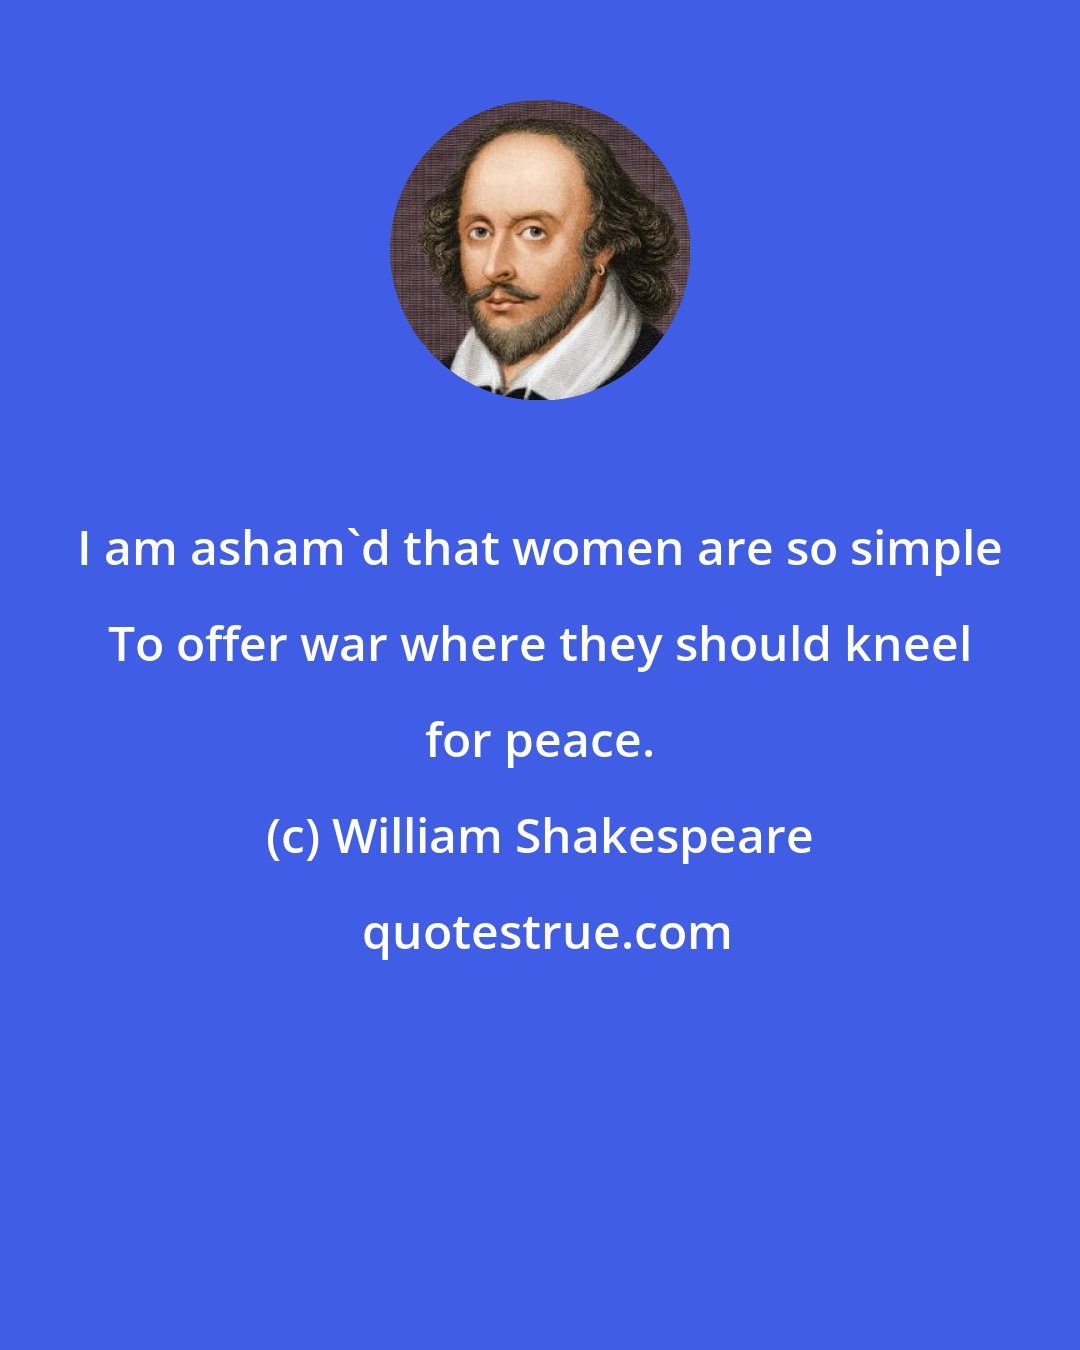 William Shakespeare: I am asham'd that women are so simple To offer war where they should kneel for peace.